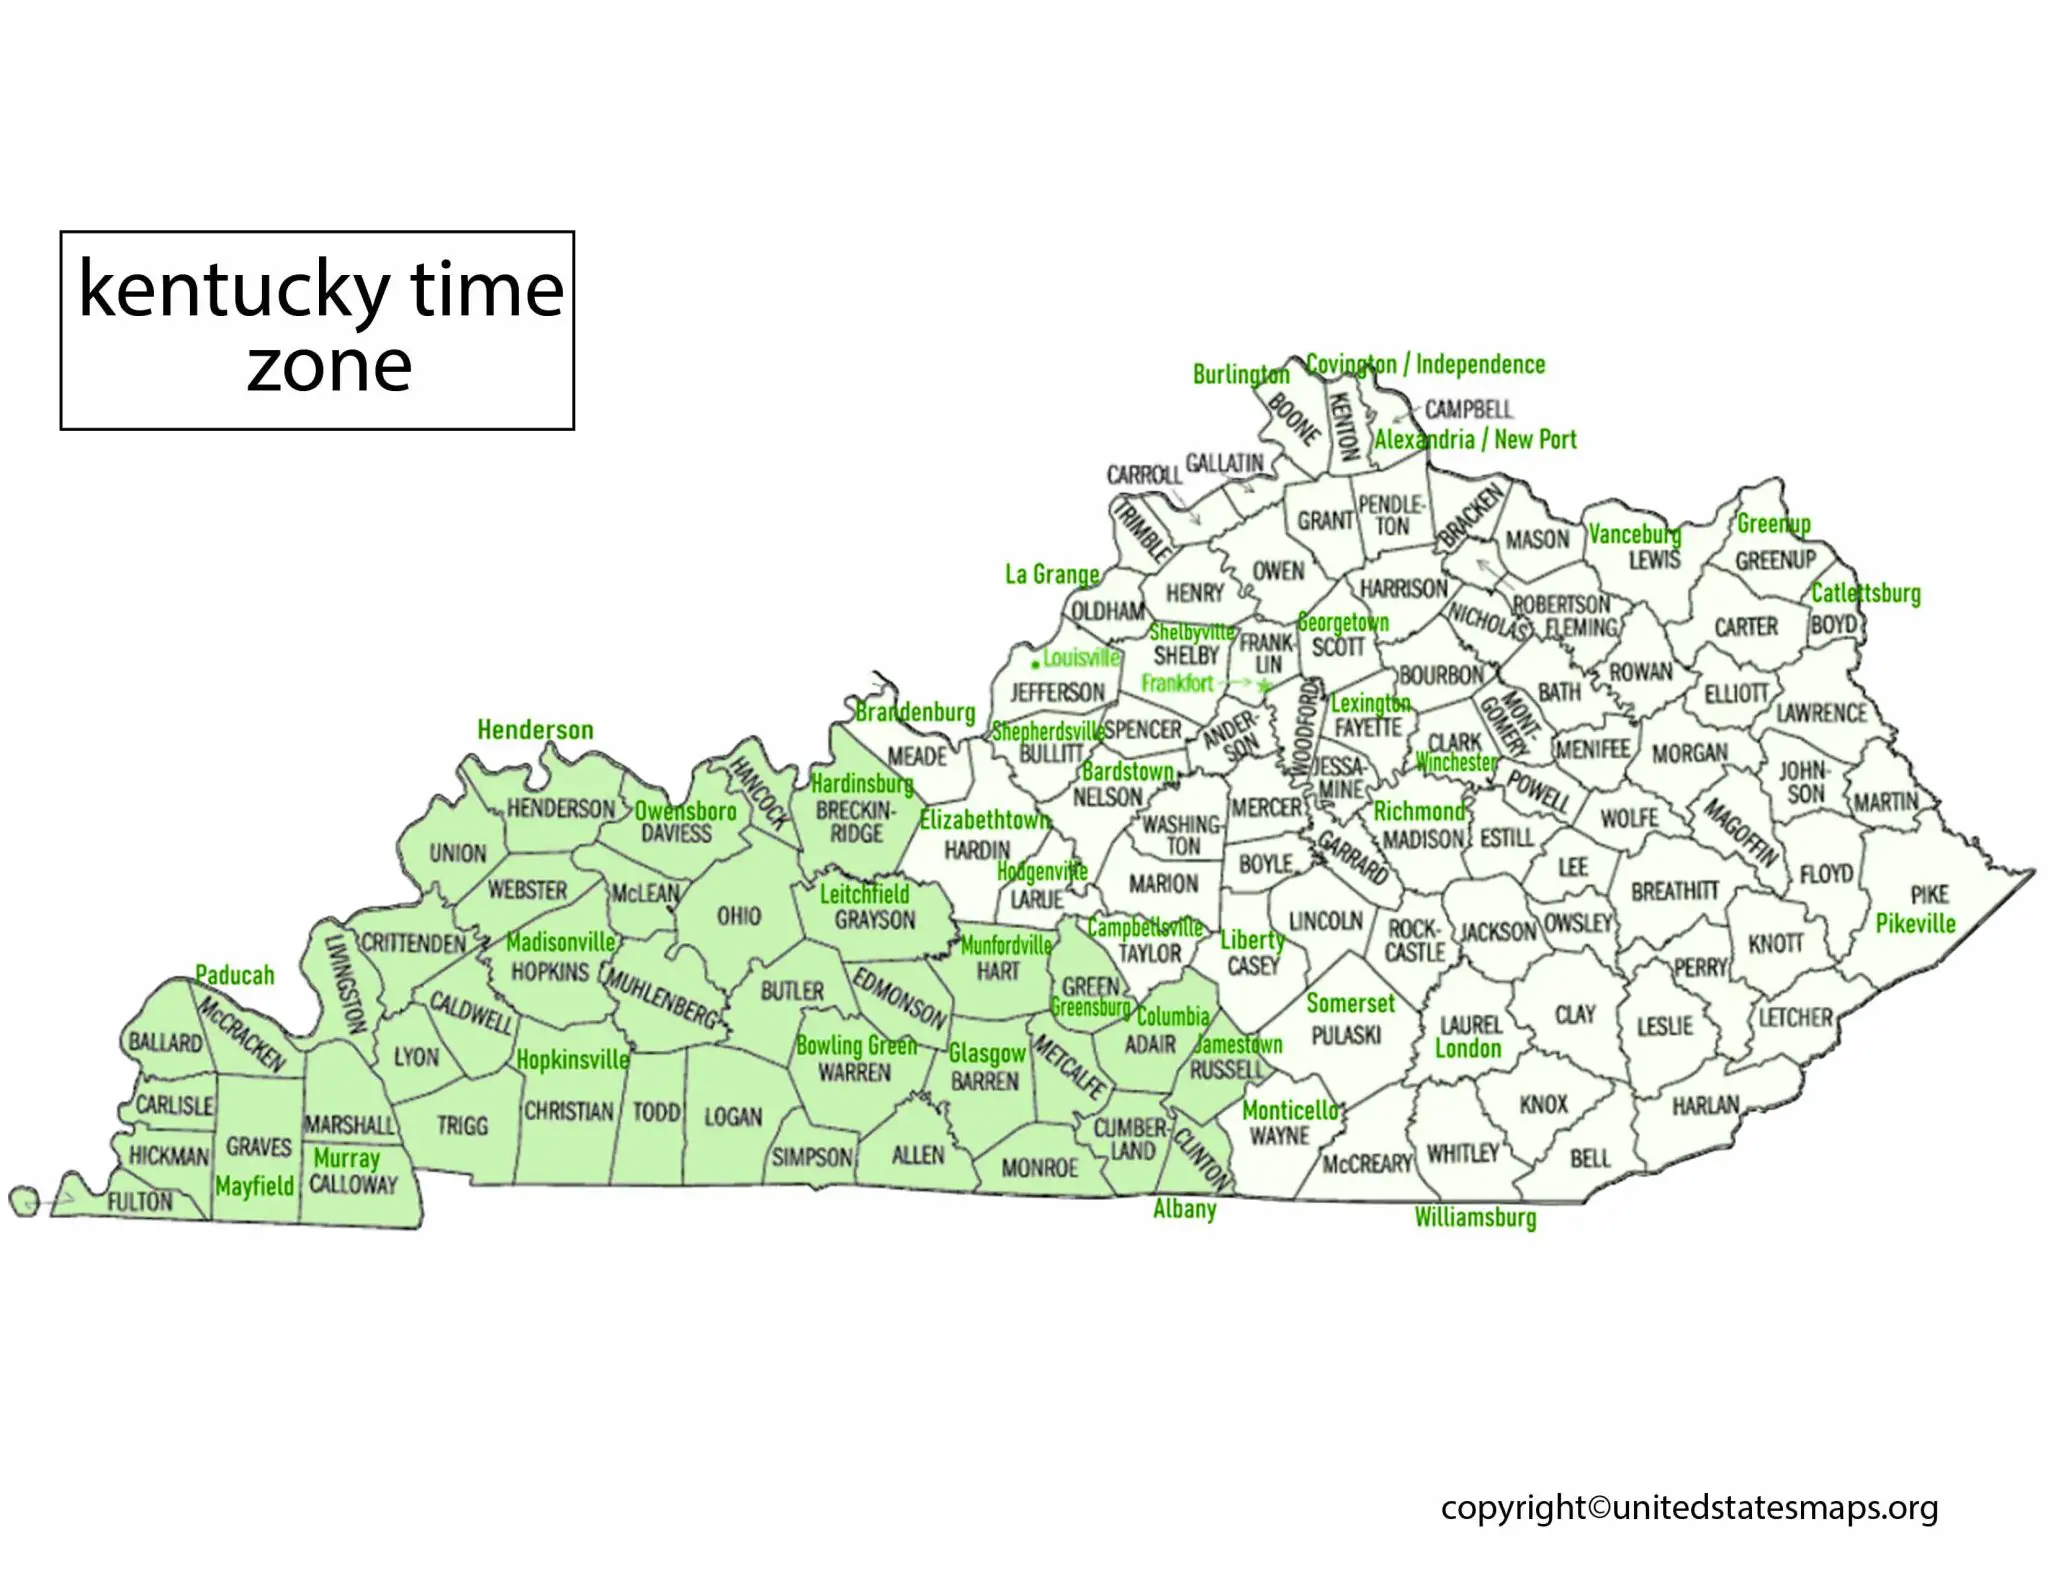 Kentucky Time Zone Map | Map of Time Zones Kentucky kentucky time zones by county